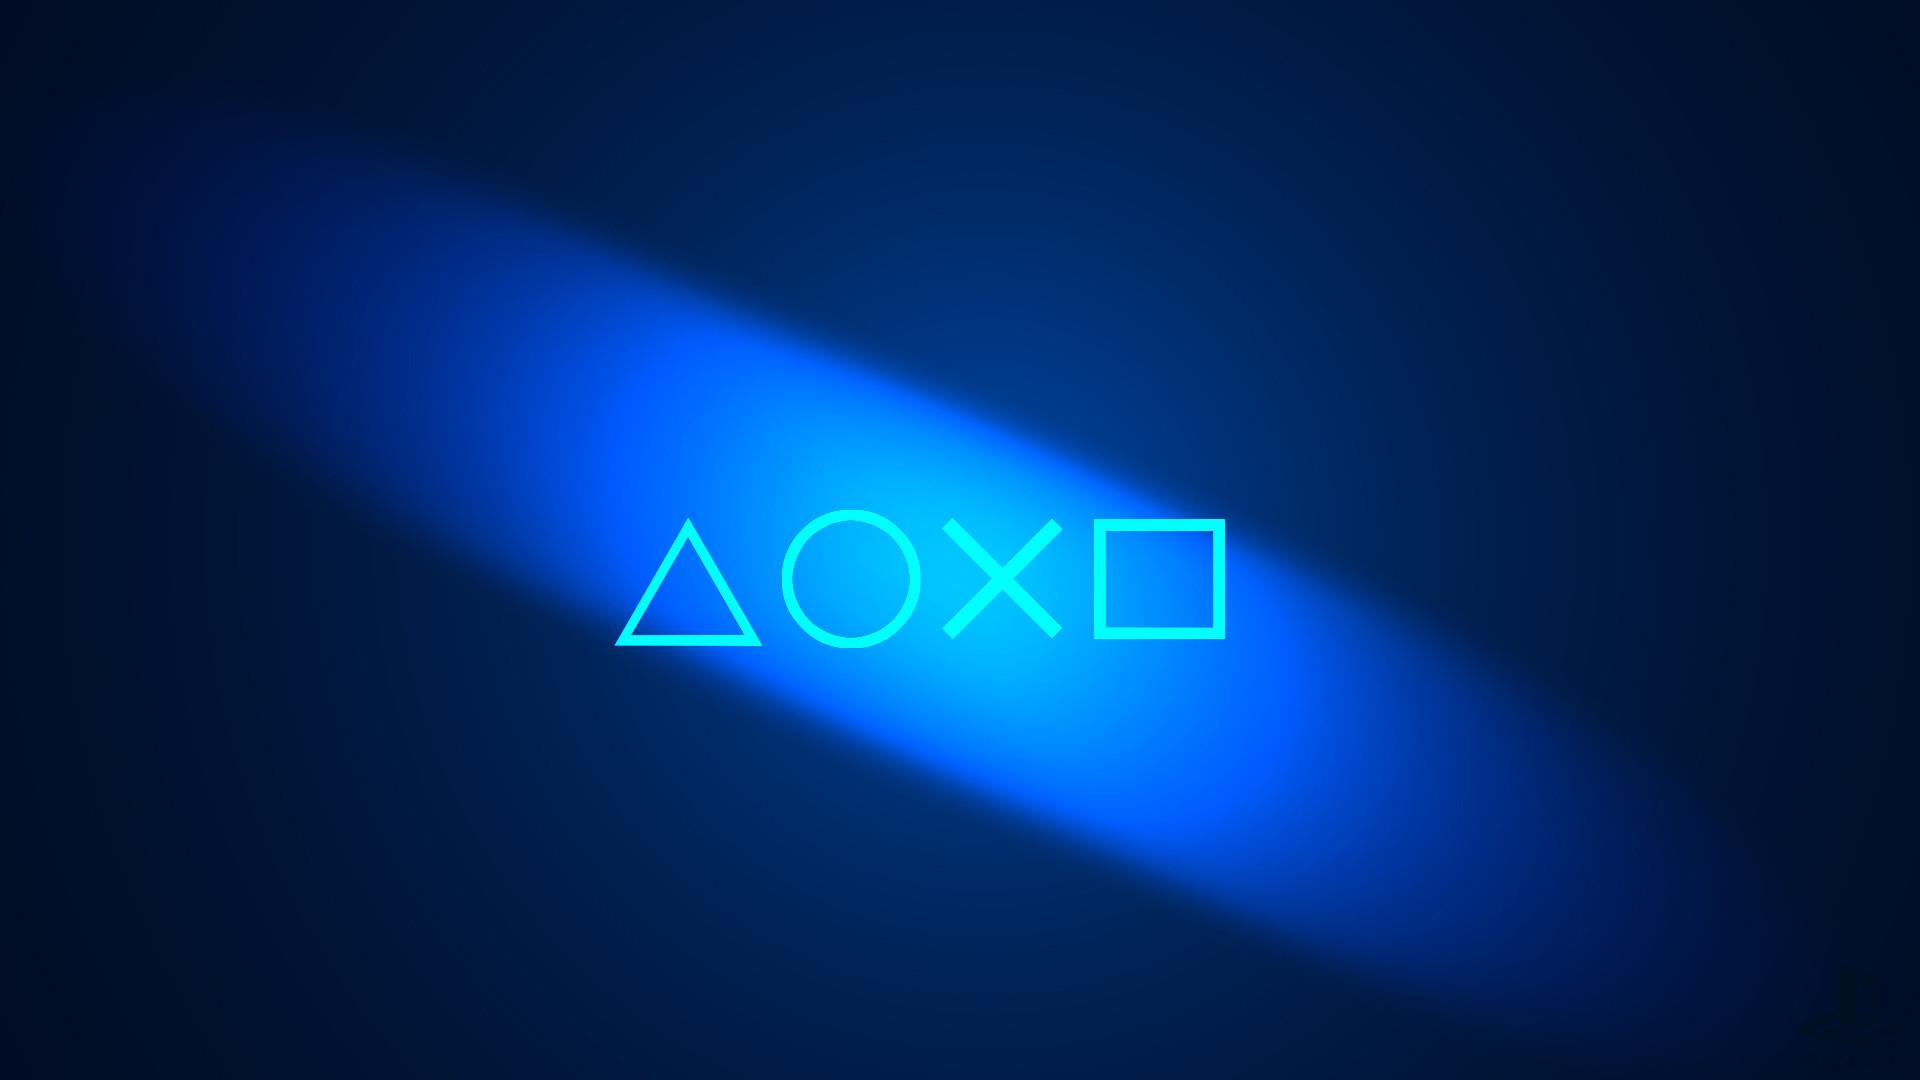 Sony Playstation 4 Wallpaper background picture